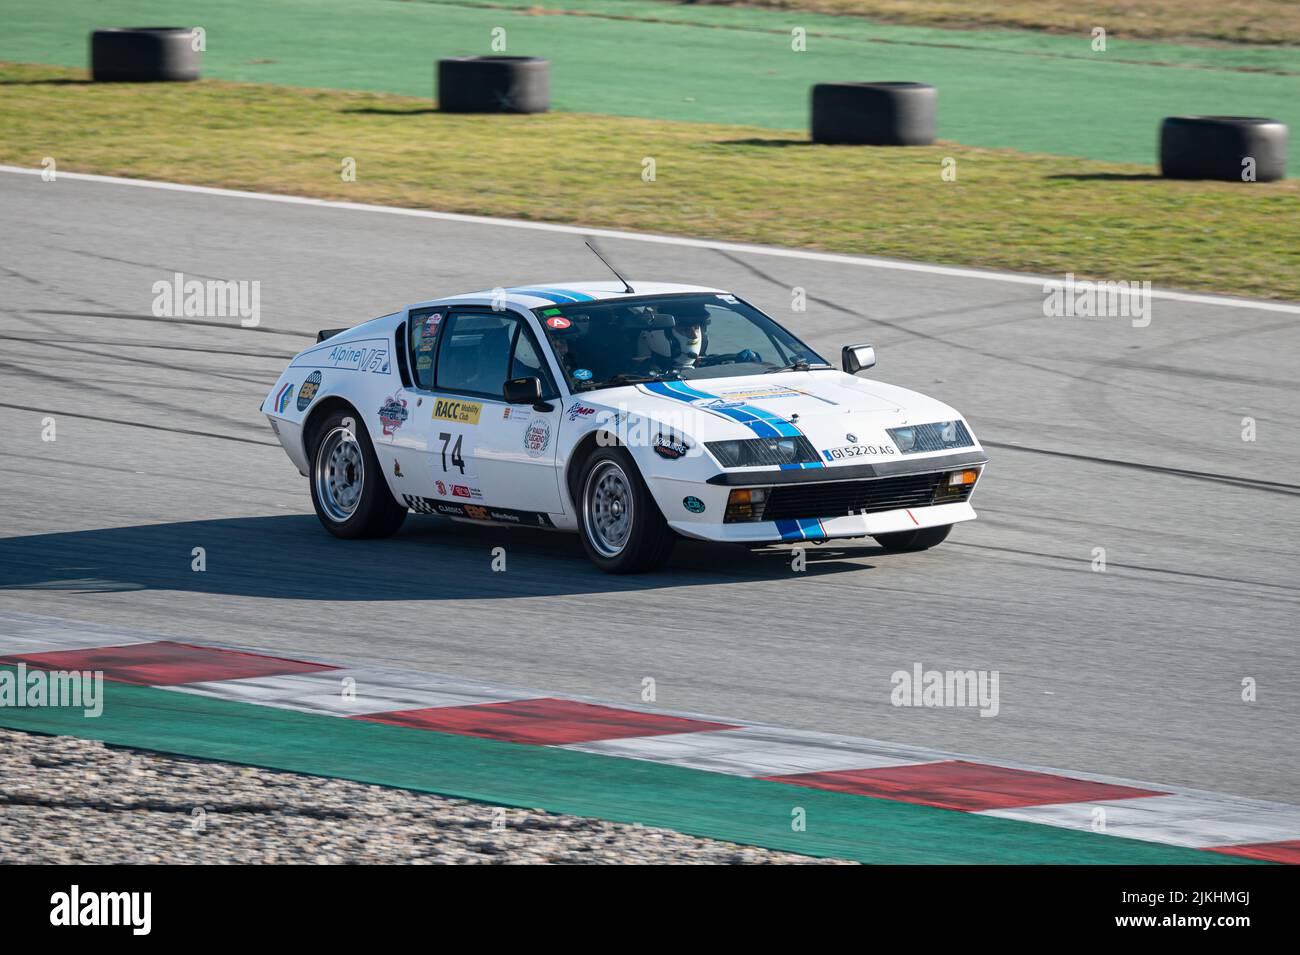 Barcelona, Spain; December 20, 2021: Alpine Renault A310 V6 Racing car in the track of Montmelo Stock Photo